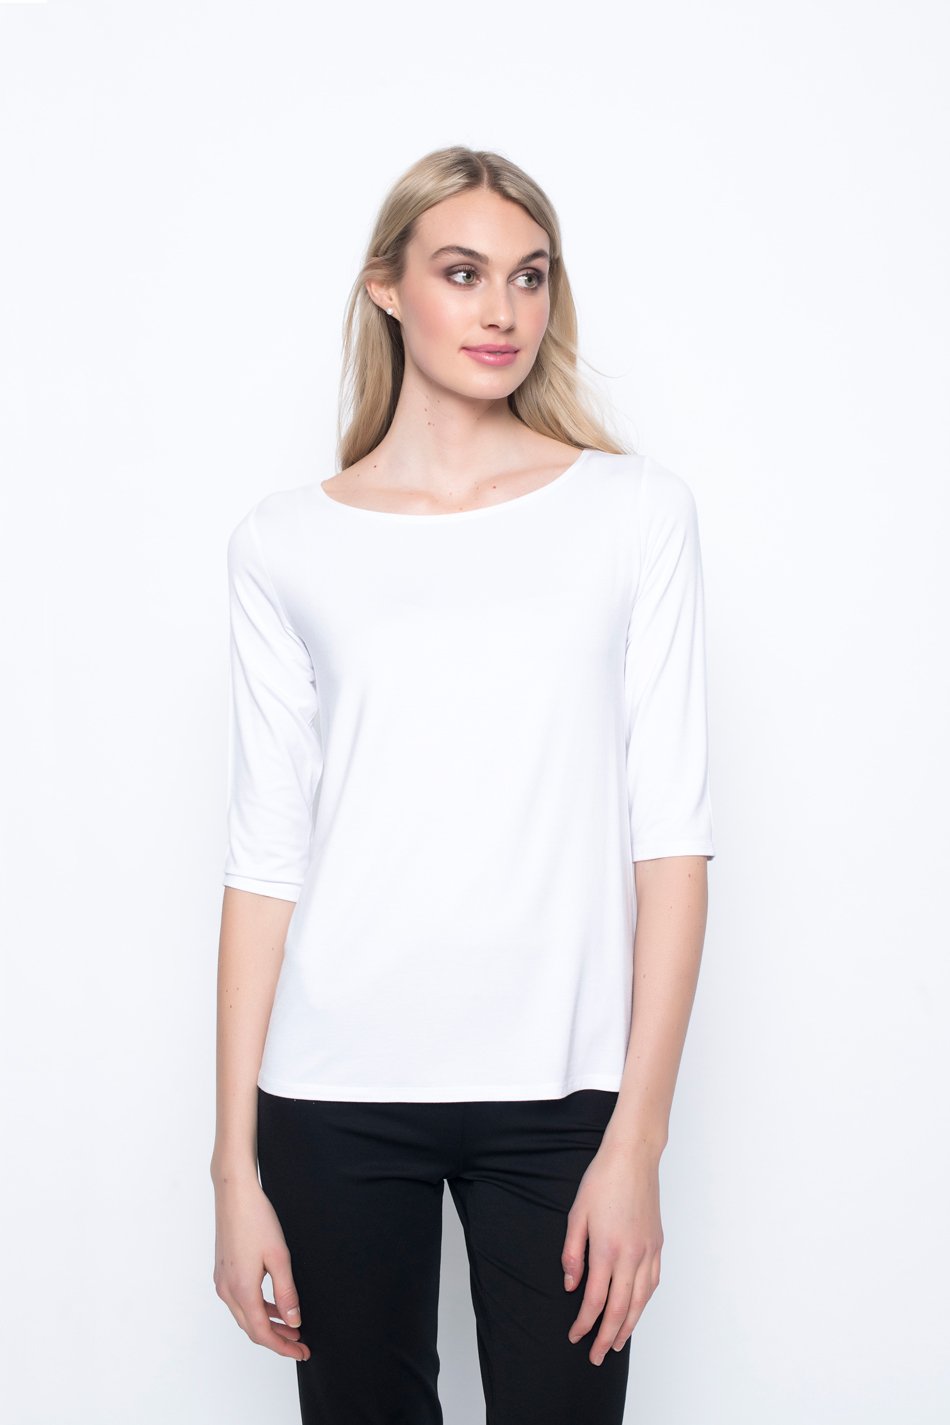 ¾ Sleeve Boat Neck Top